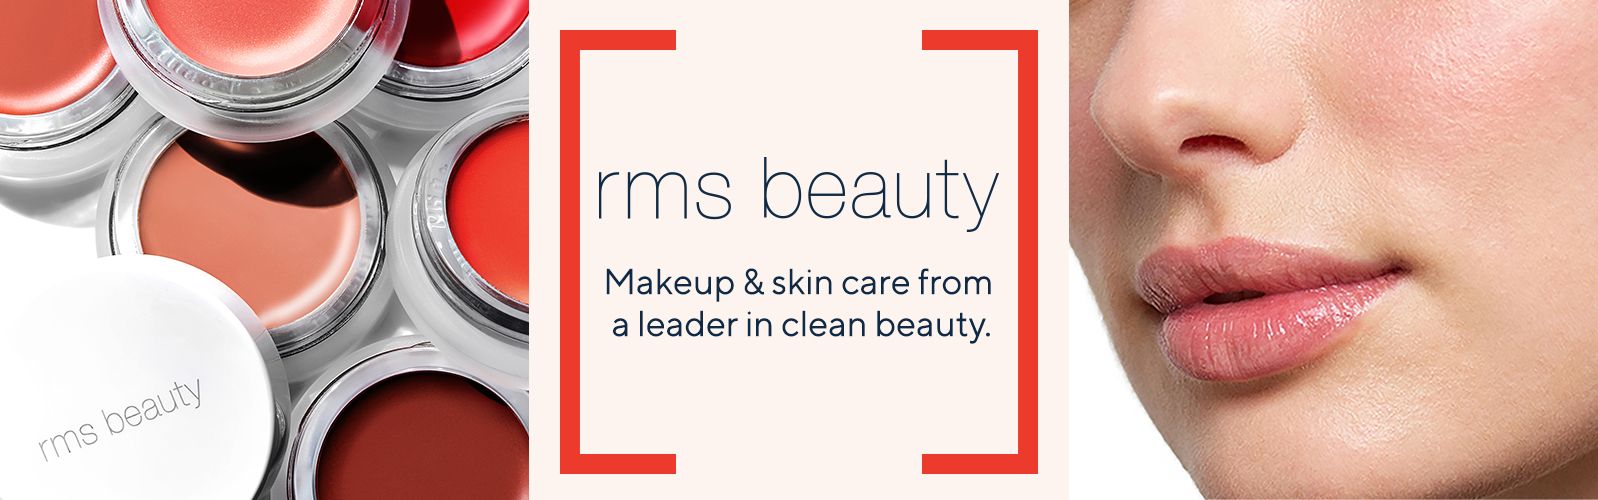 rms beauty - Makeup & skin care from a leader in clean beauty.